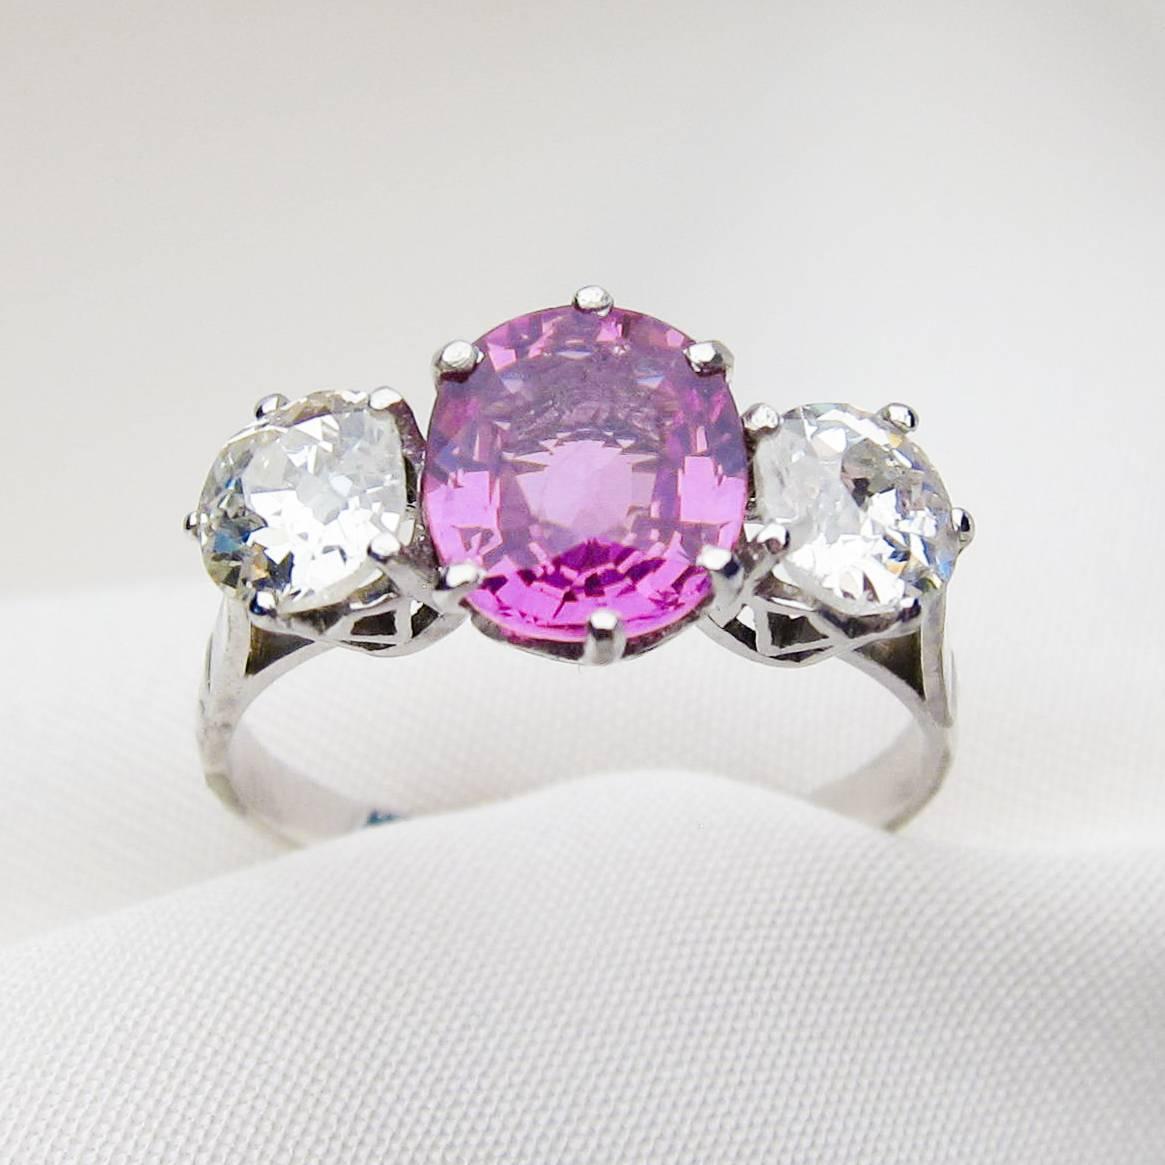 Circa 1920. This lovely platinum Art Deco Era ring features a stunning natural, mixed-cut pink sapphire weighing 1.80 carats. On either side of the sapphire sits a sparkling round old European-cut diamond. The accent diamonds weigh 1.00 carats total